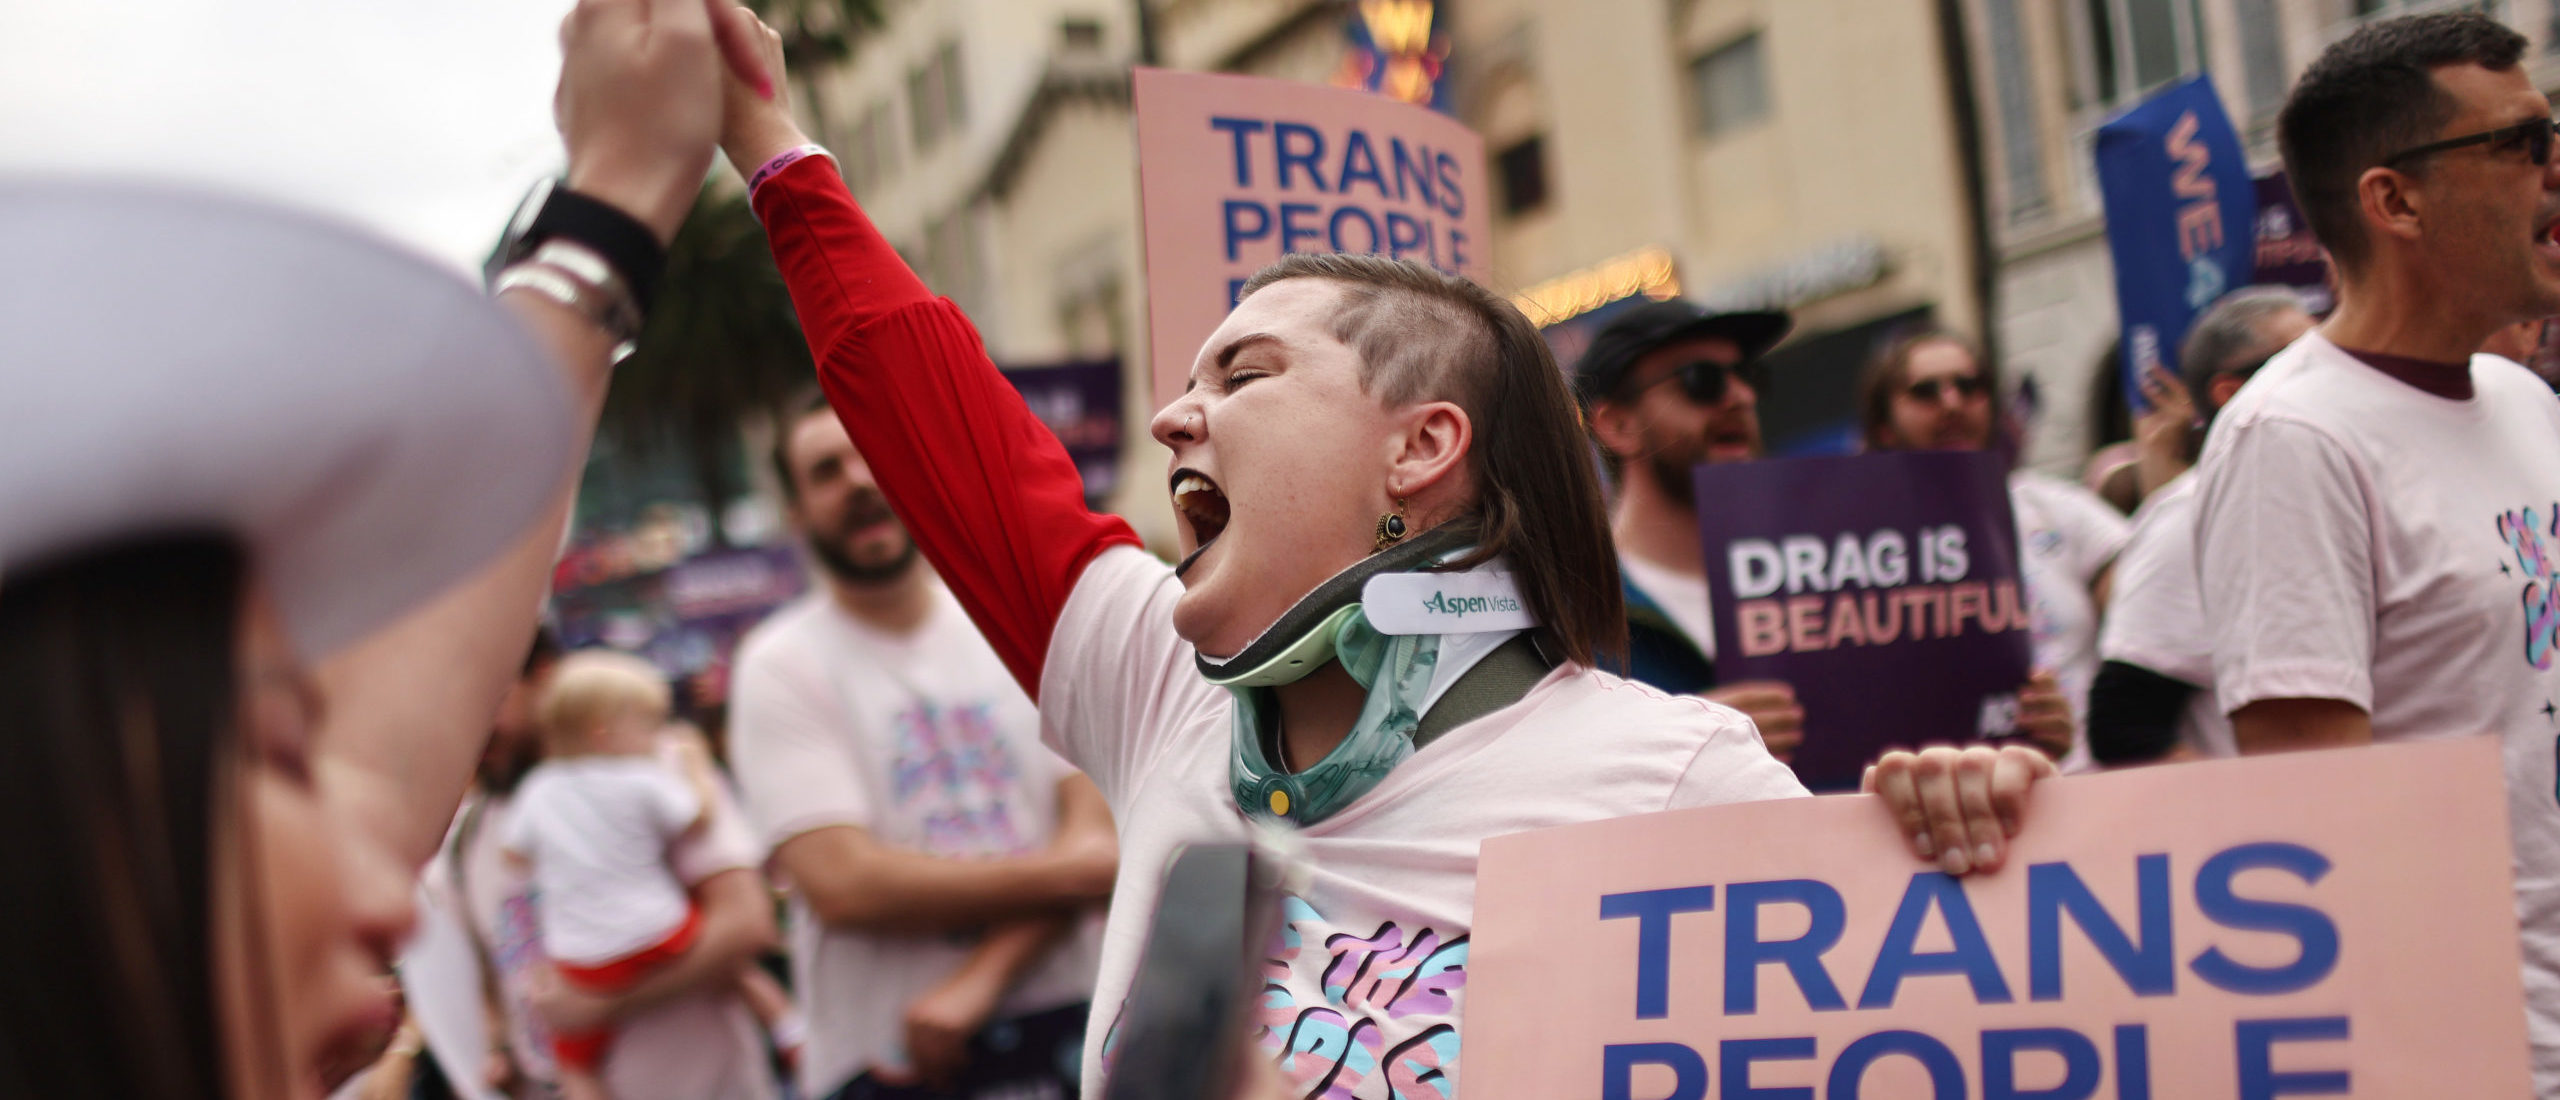 LOS ANGELES, CALIFORNIA - JUNE 11: ACLU march participants chant and hold signs in support of rights for transgender people and drag performers during the 2023 LA Pride Parade in Hollywood on June 11, 2023 in Los Angeles, California. (Photo by Mario Tama/Getty Images)